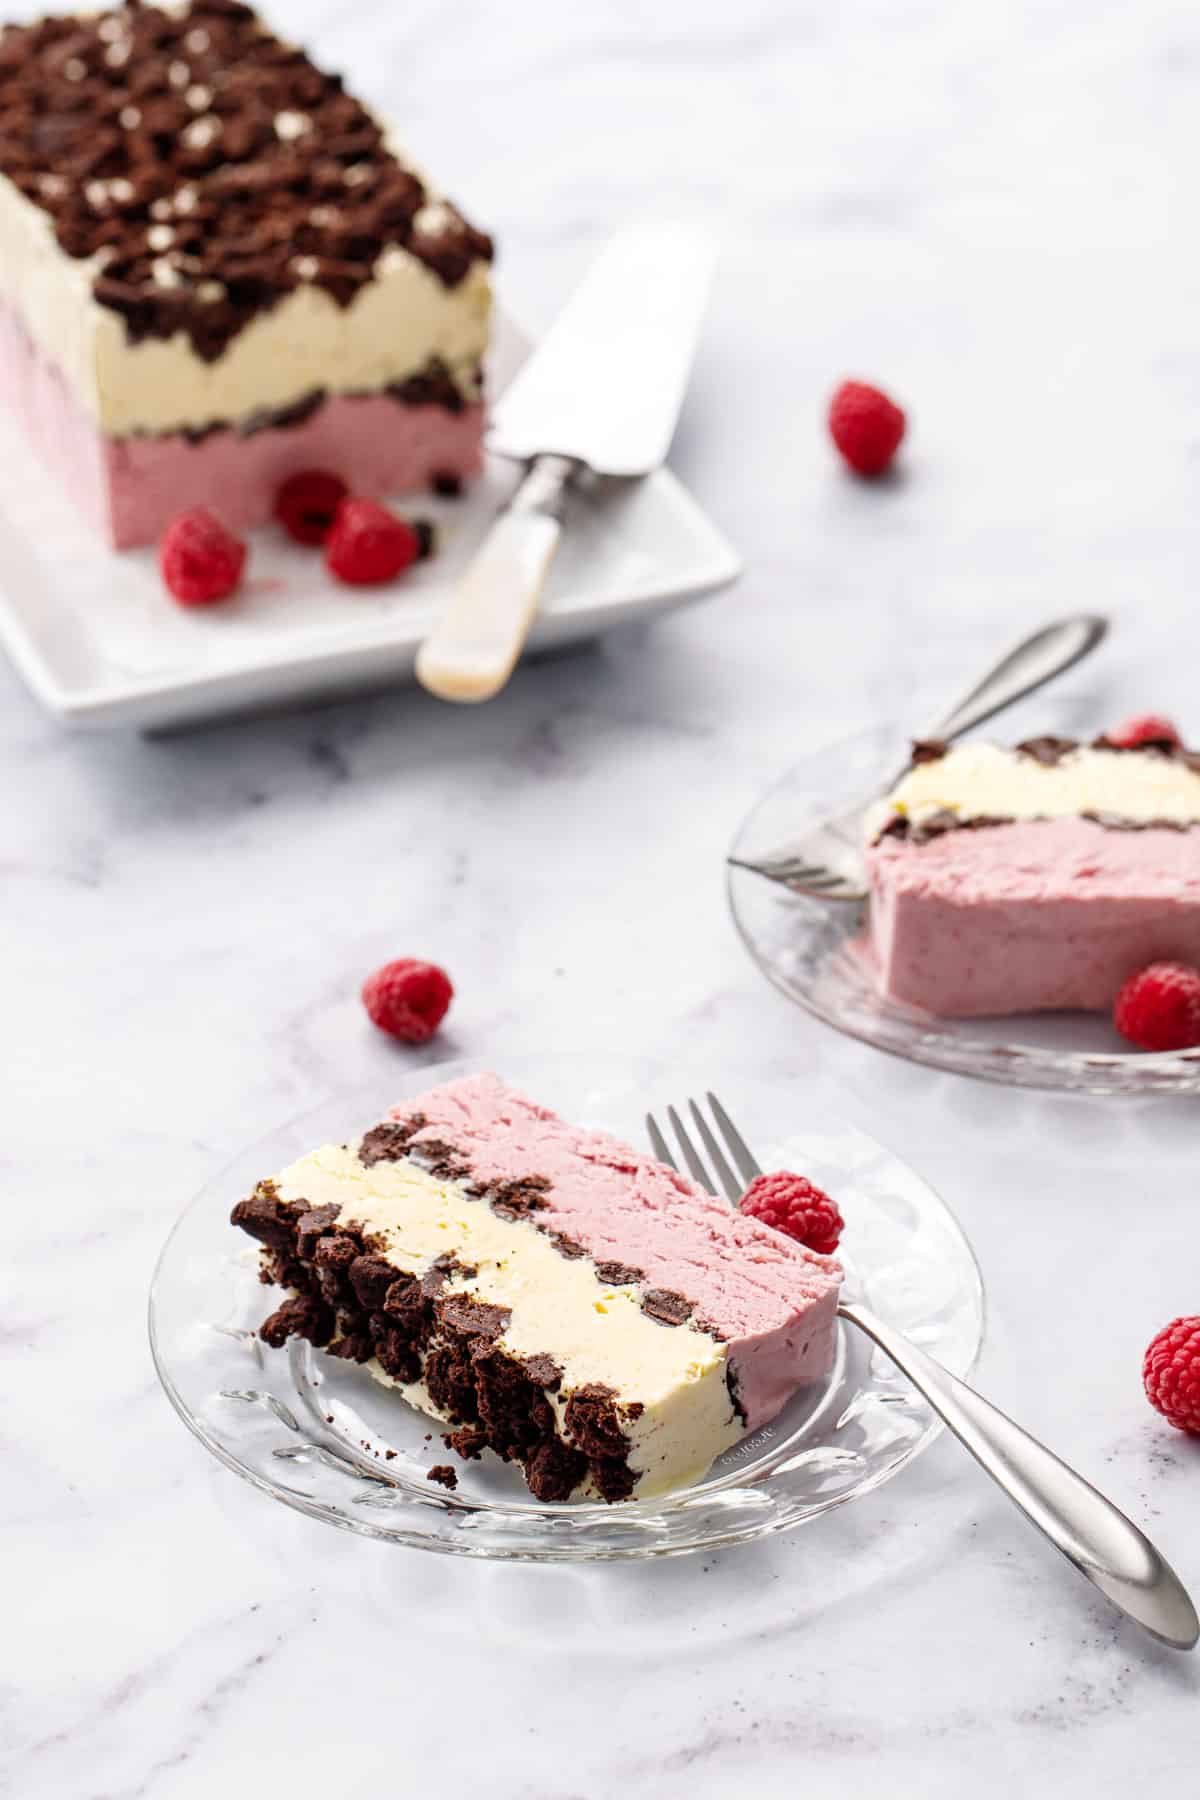 Slices of Raspberry & Passionfruit Semifreddo with Chocolate Crumbs on glass plates, rest of the frozen loaf in the background with a few frozen raspberries scattered around.